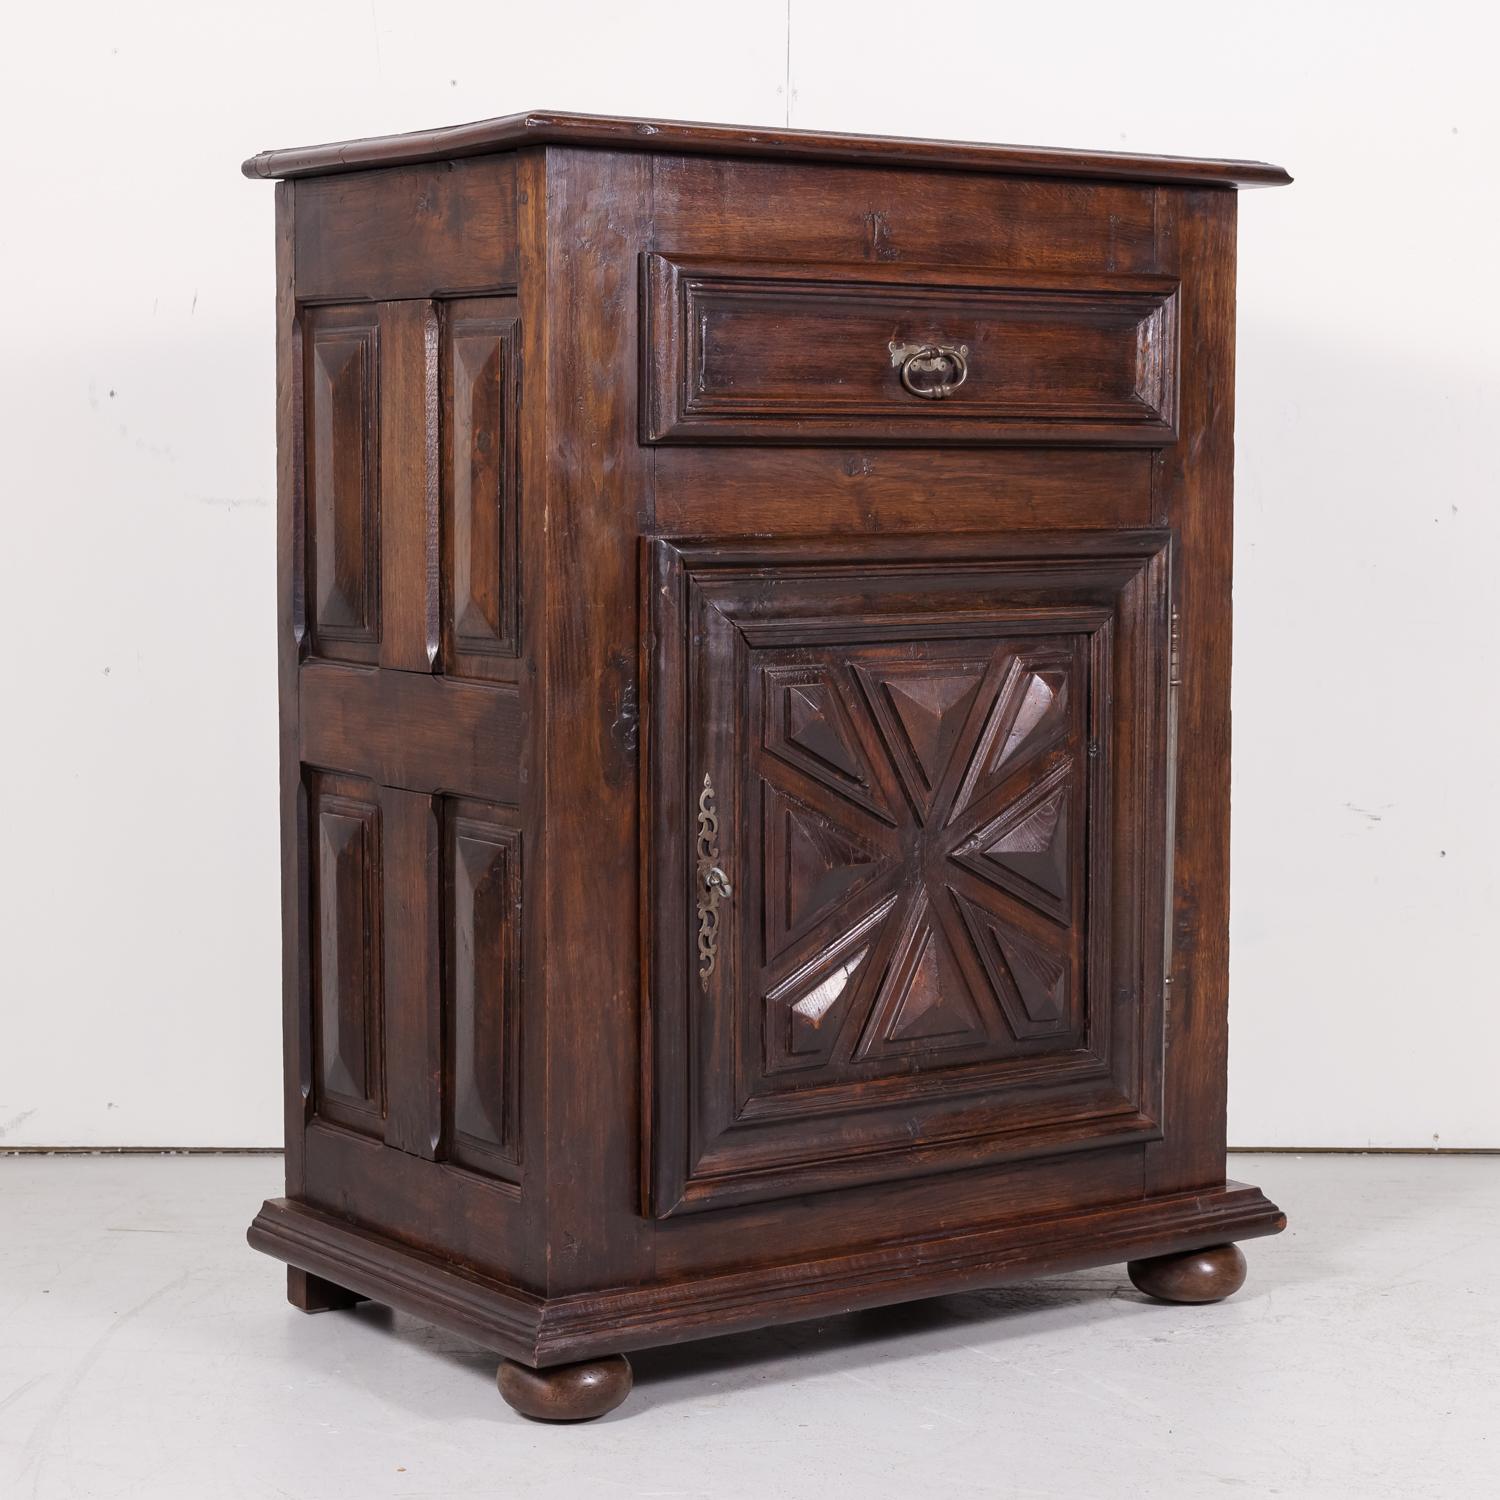 Early 19th Century Louis XIII Oak Jam Cabinet or Confiturier from Normandy In Good Condition For Sale In Birmingham, AL